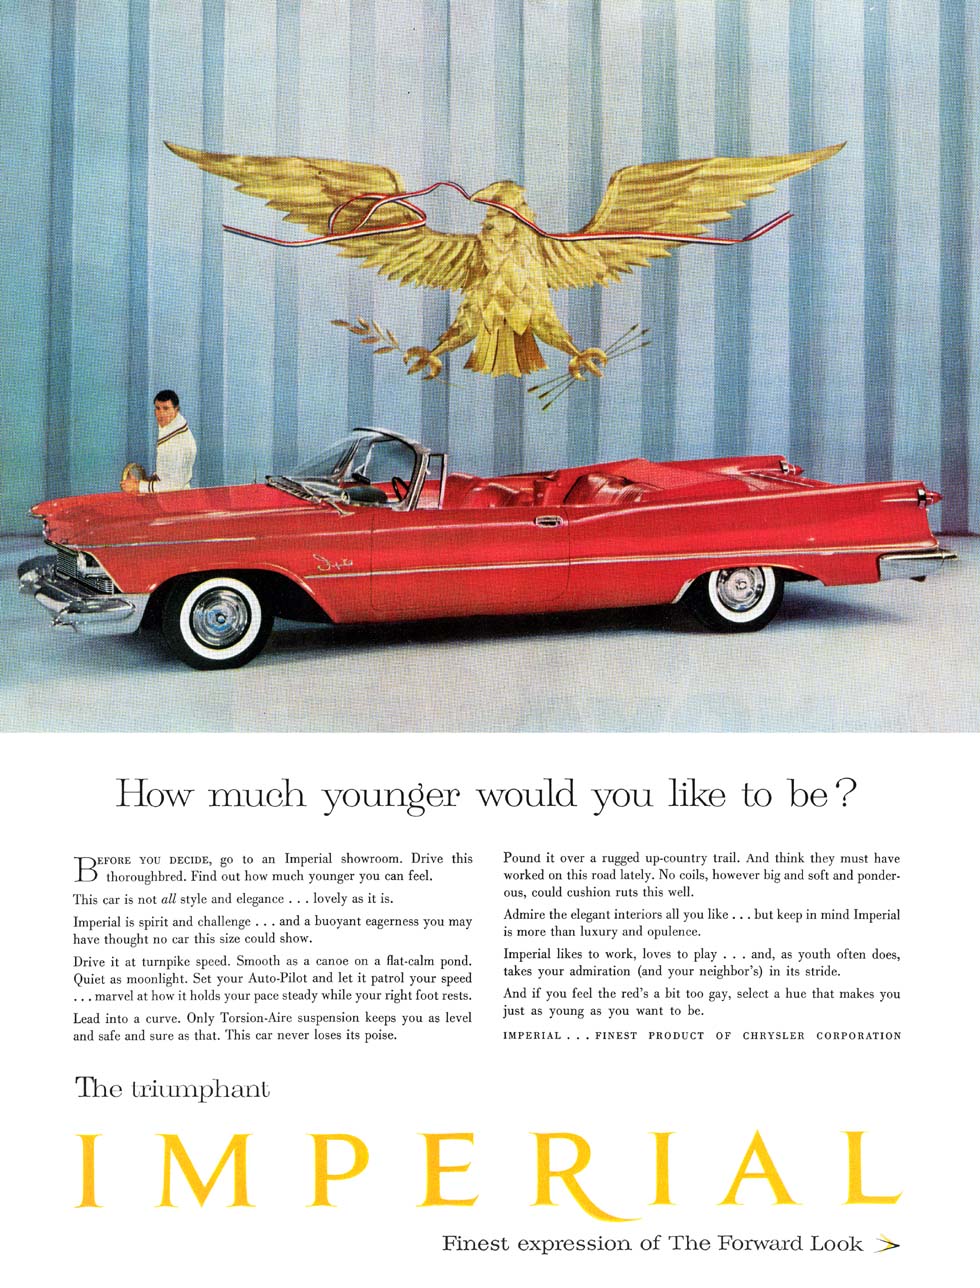 1958 Imperial Ad-09